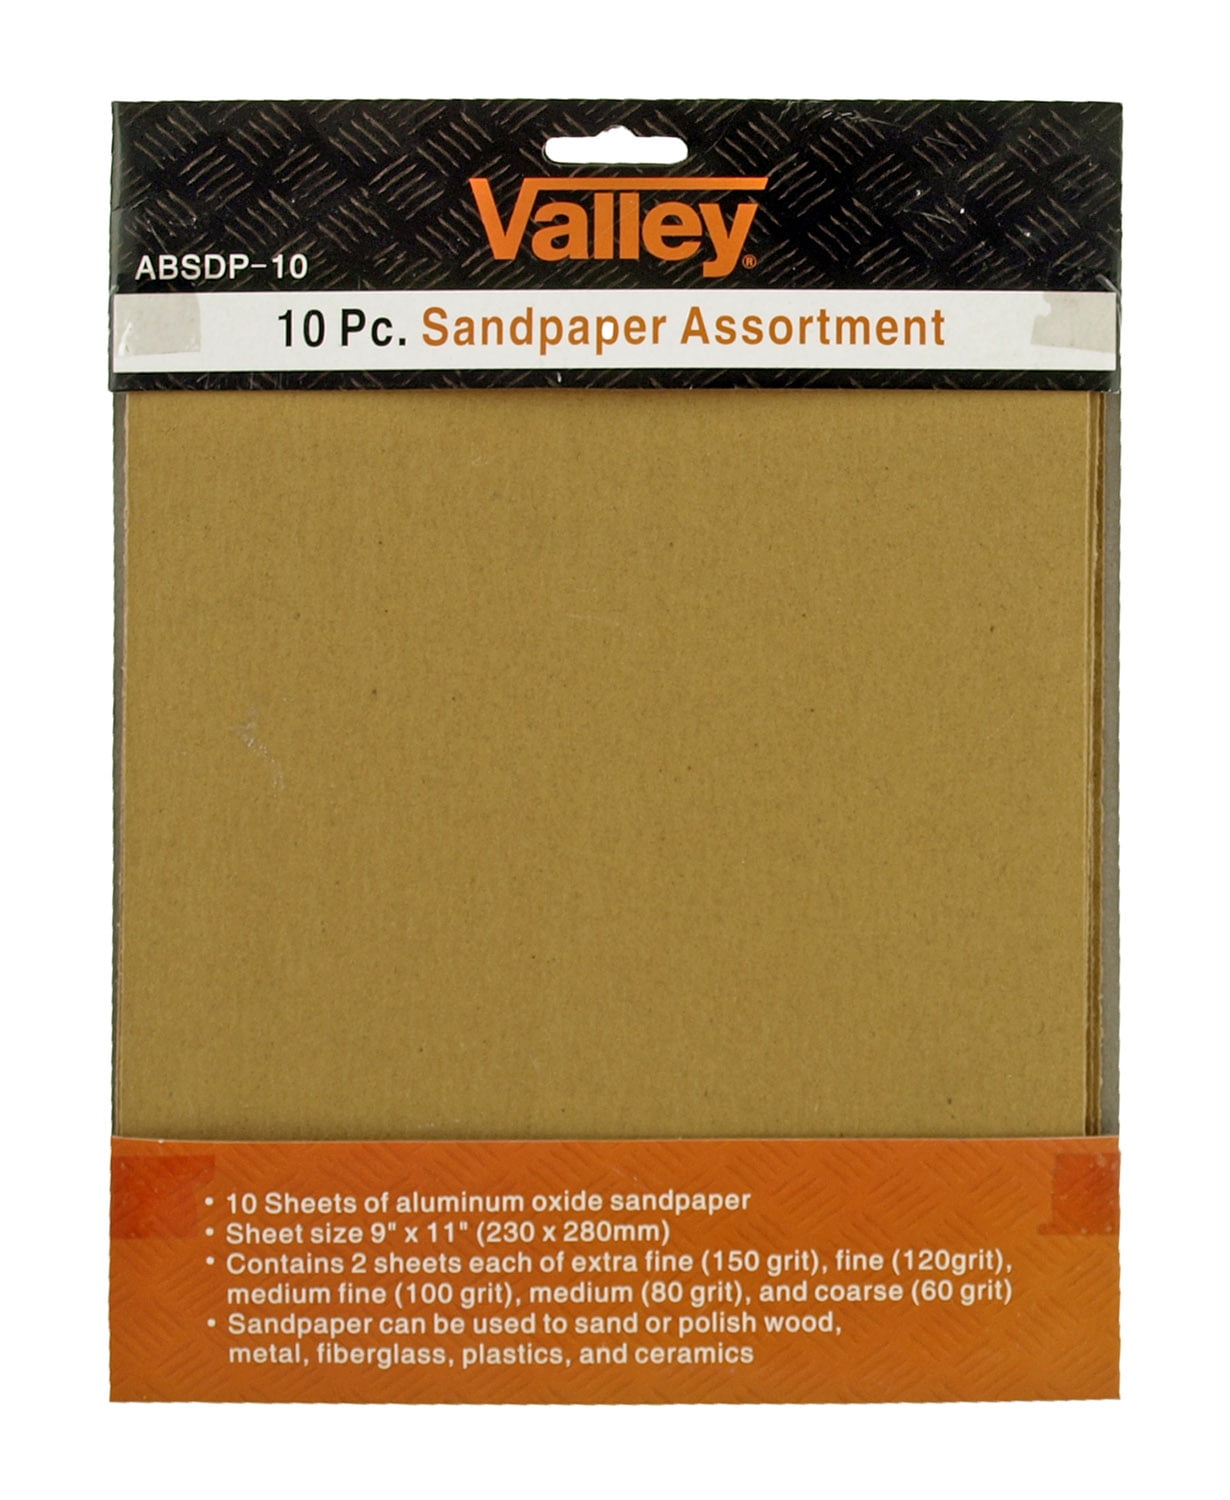 10 pc. Sandpaper Assortment with 150 - 60 Grit Sheets - Valley 